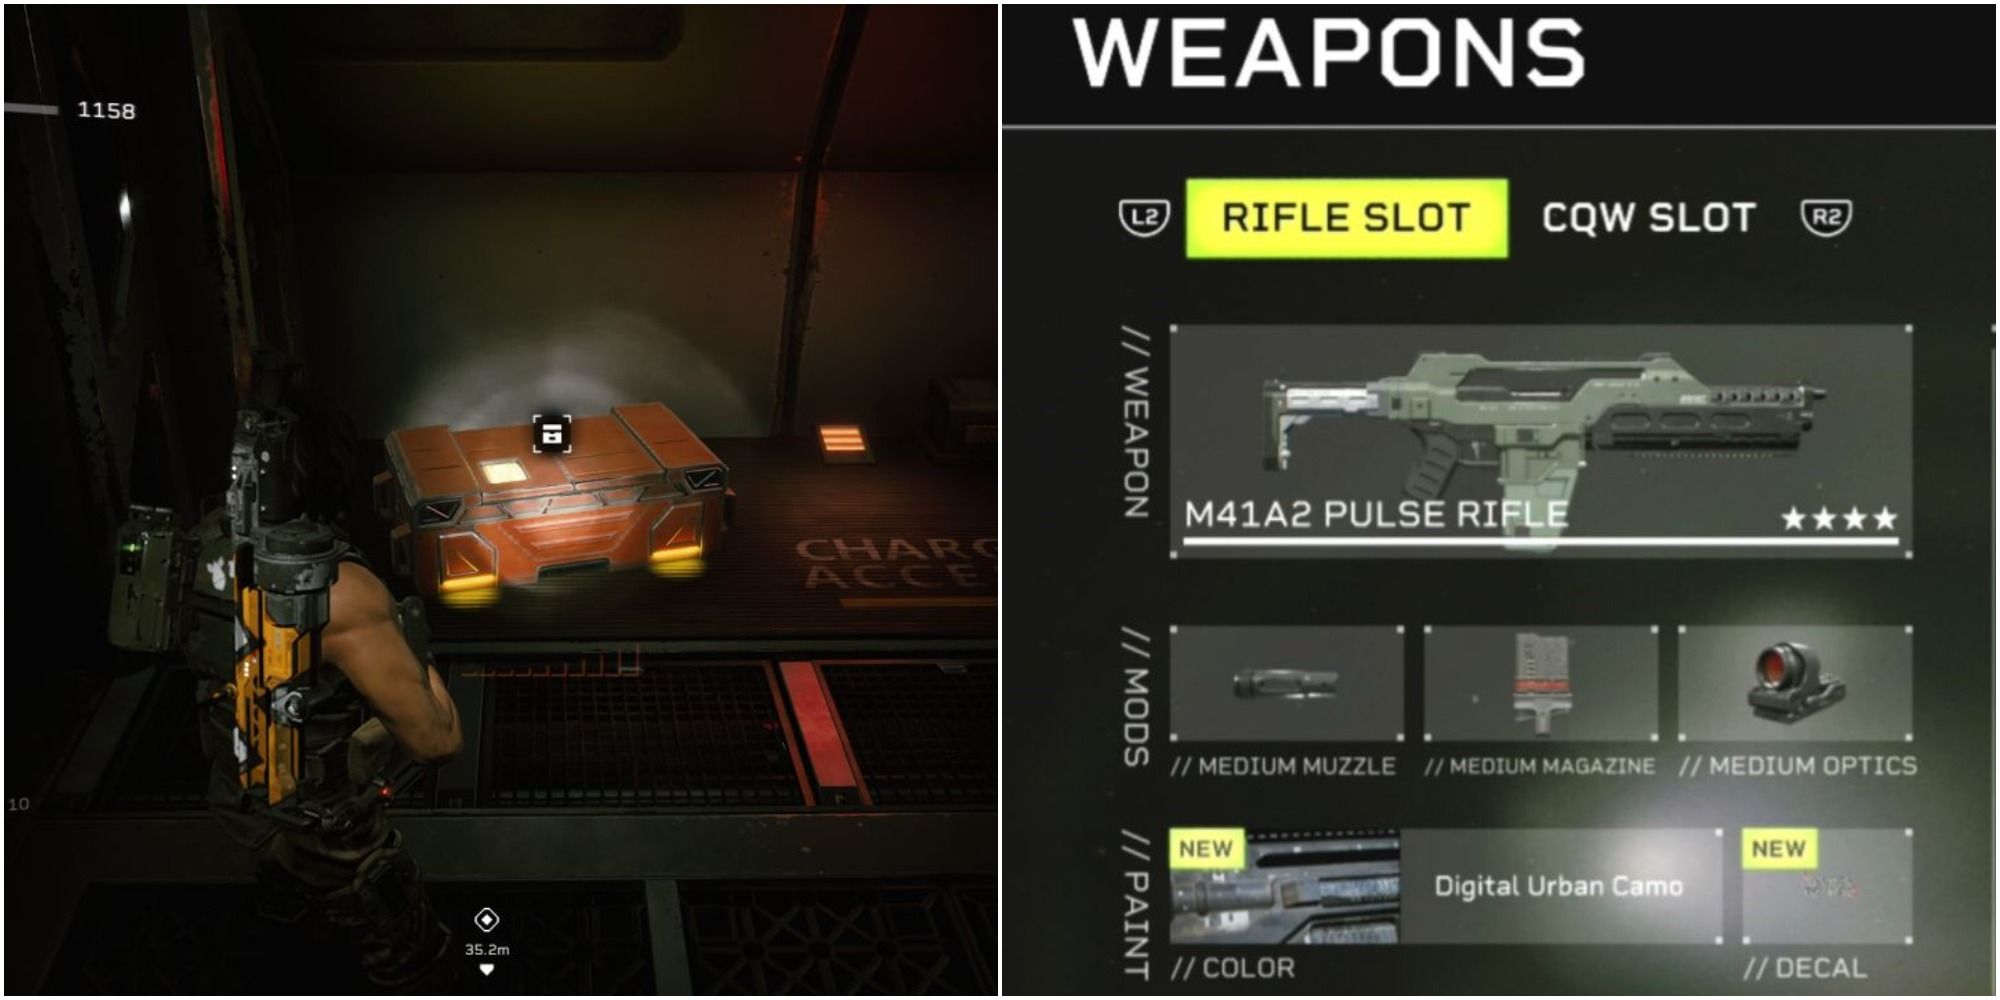 Left: Finding the hidden caches in Aliens: Fireteam Elite. Right: weapon screen for the Pulse Rifle showing off attachments